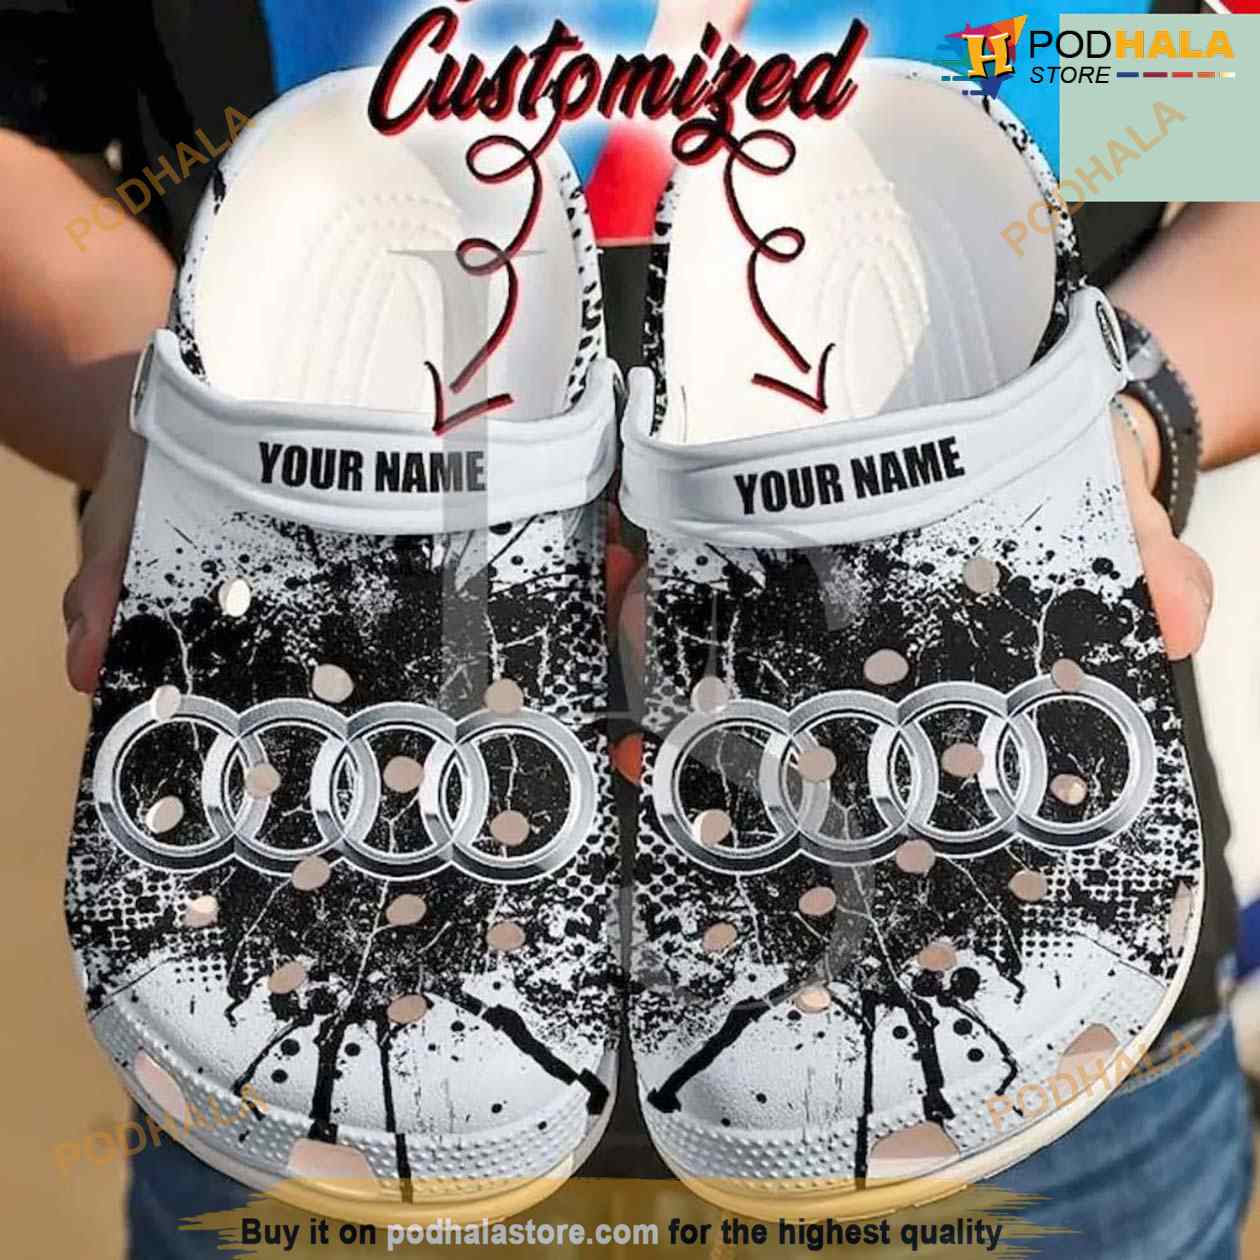 Audi Clog Shoes - Bring Your Ideas, Thoughts Into Today